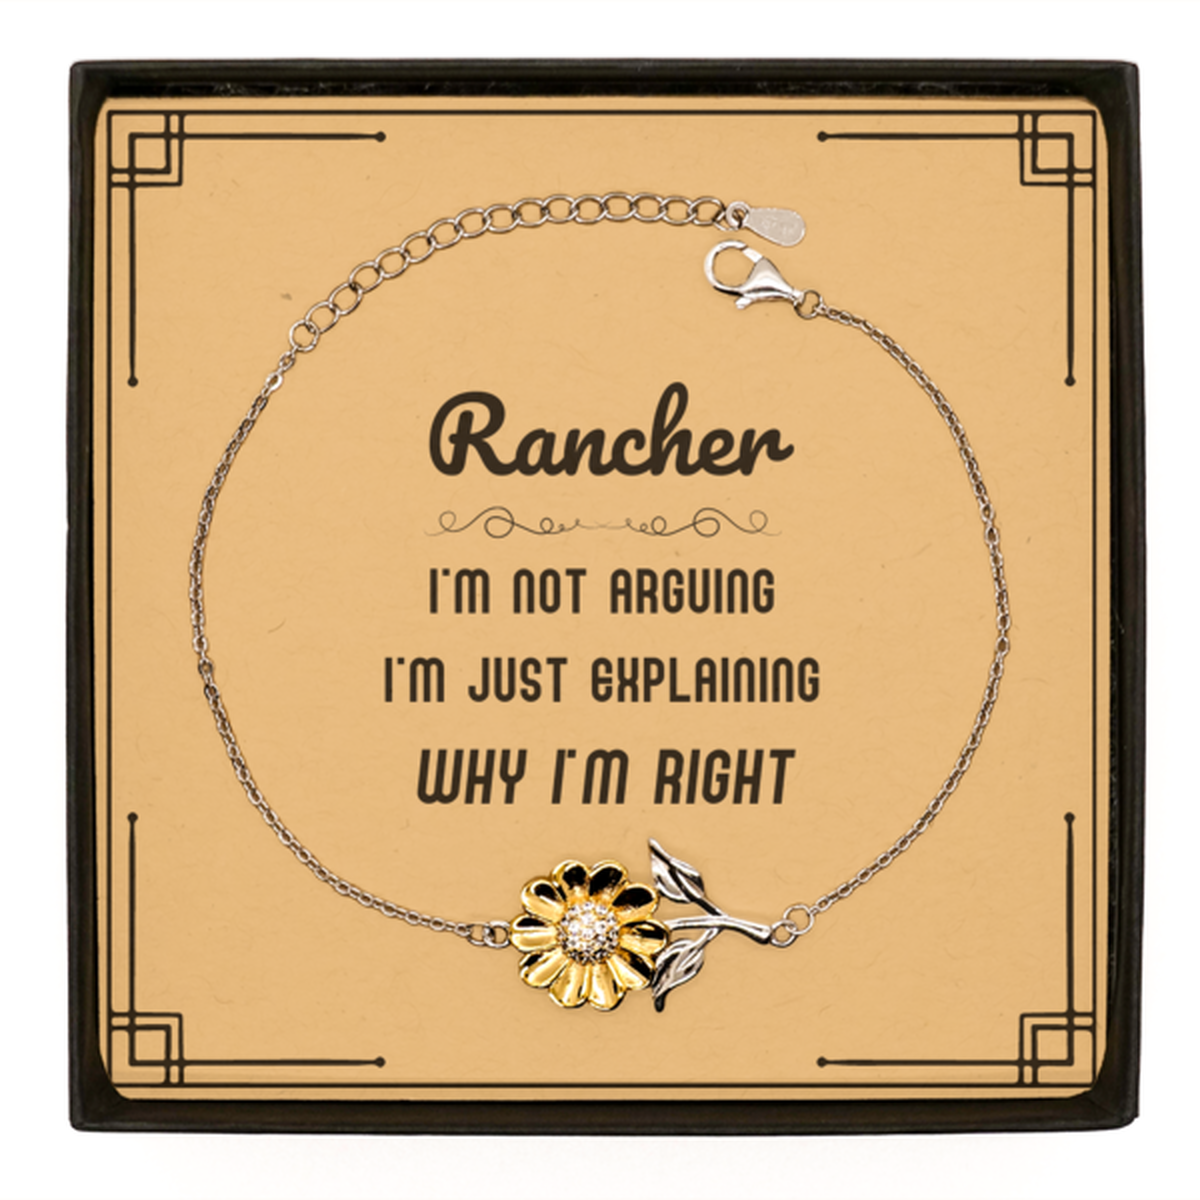 Rancher I'm not Arguing. I'm Just Explaining Why I'm RIGHT Sunflower Bracelet, Funny Saying Quote Rancher Gifts For Rancher Message Card Graduation Birthday Christmas Gifts for Men Women Coworker